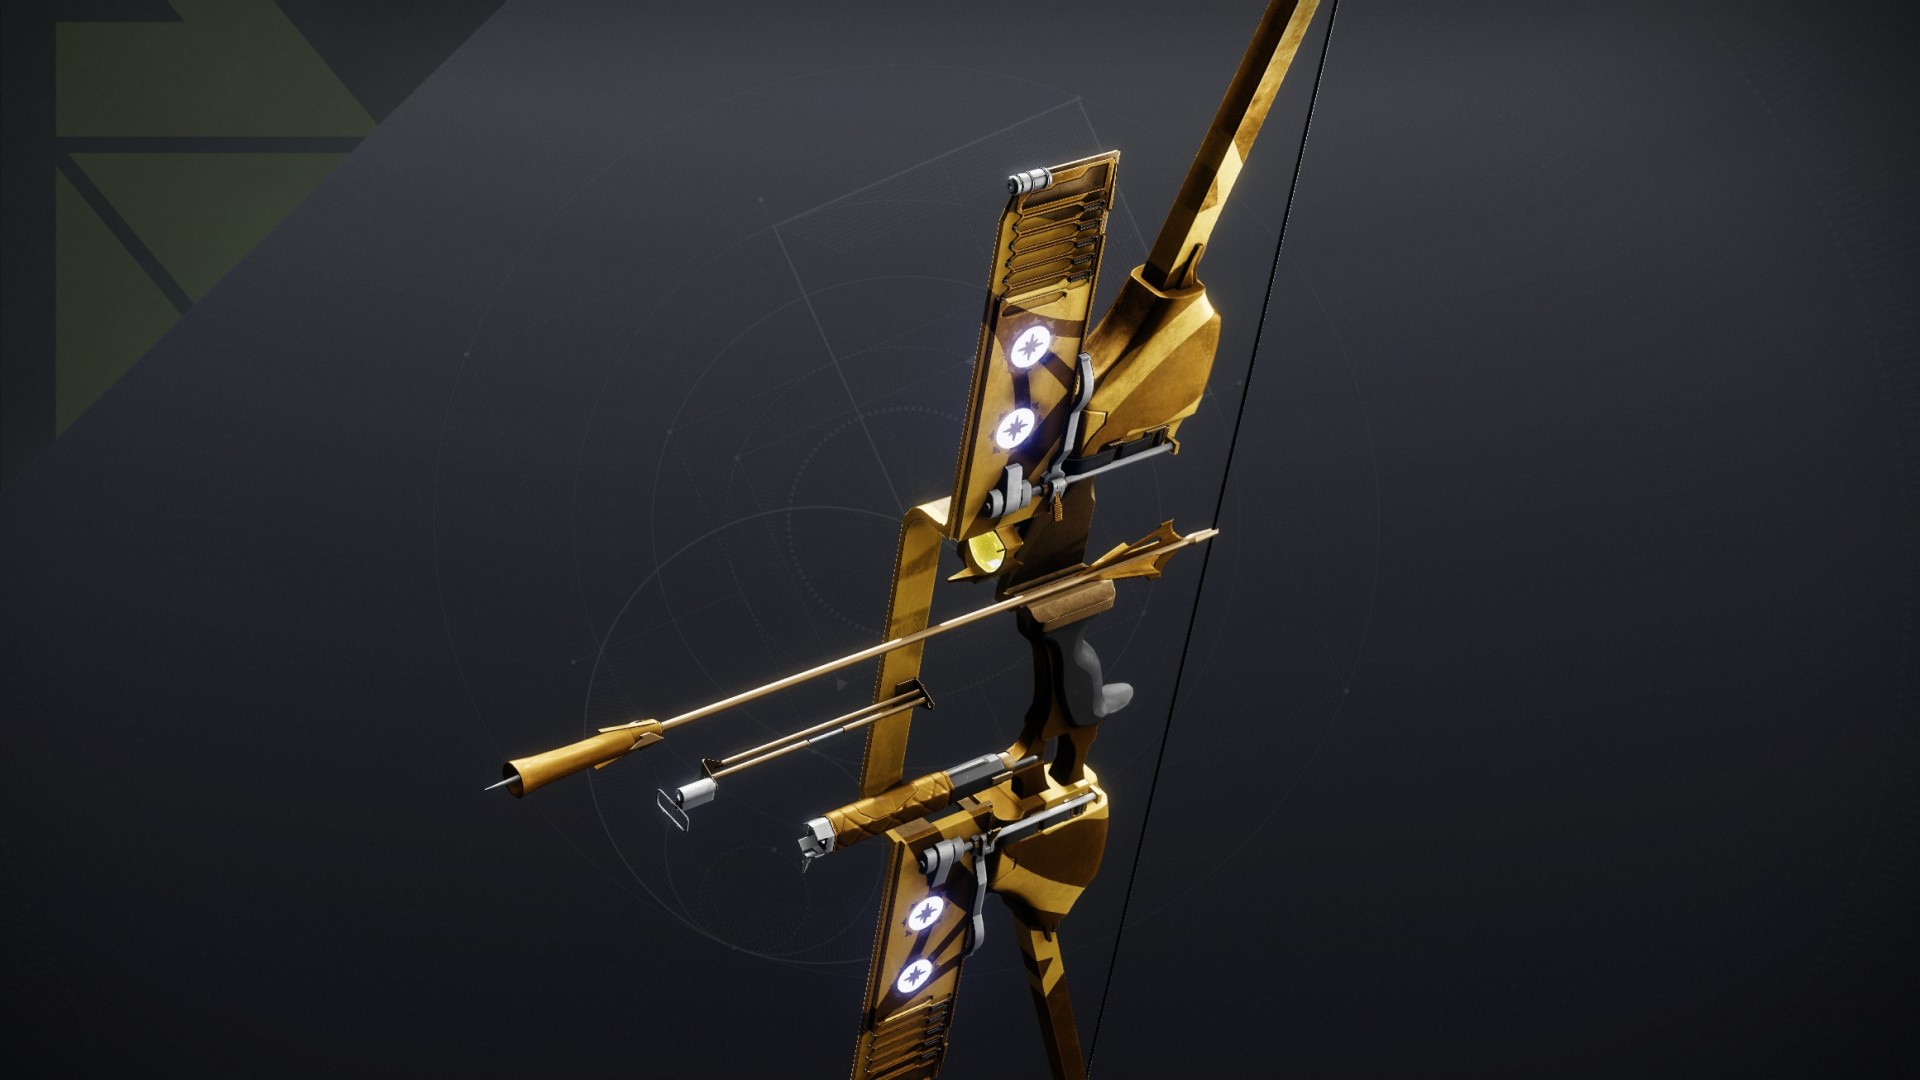  Destiny 2 Fortunate Star god roll guide: Best perks, bowstring, and arrow 